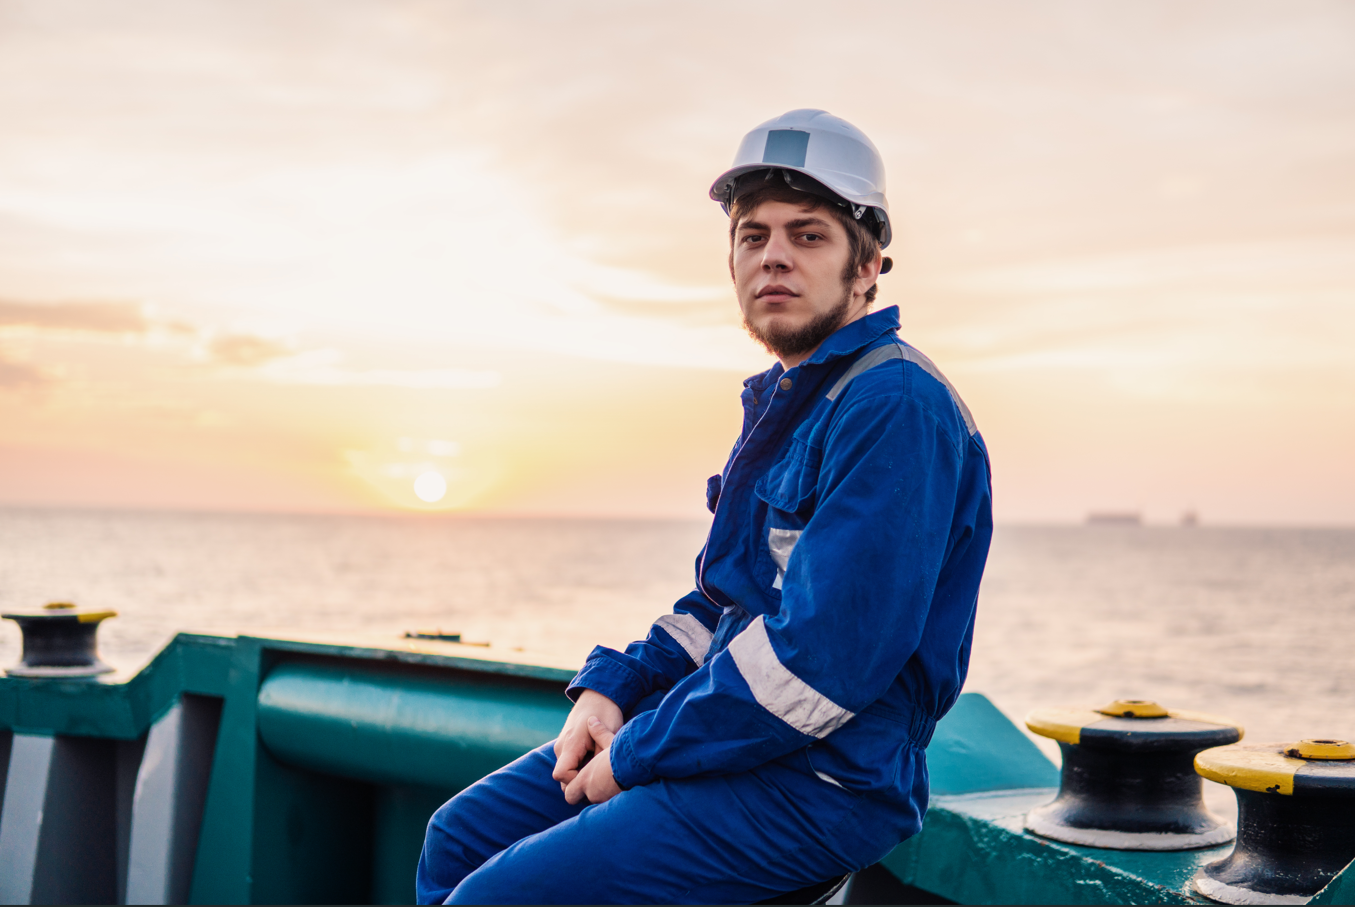 Seafarer resting on the ship deck during golden hour, highlighting the moments of respite in the demanding maritime industry.